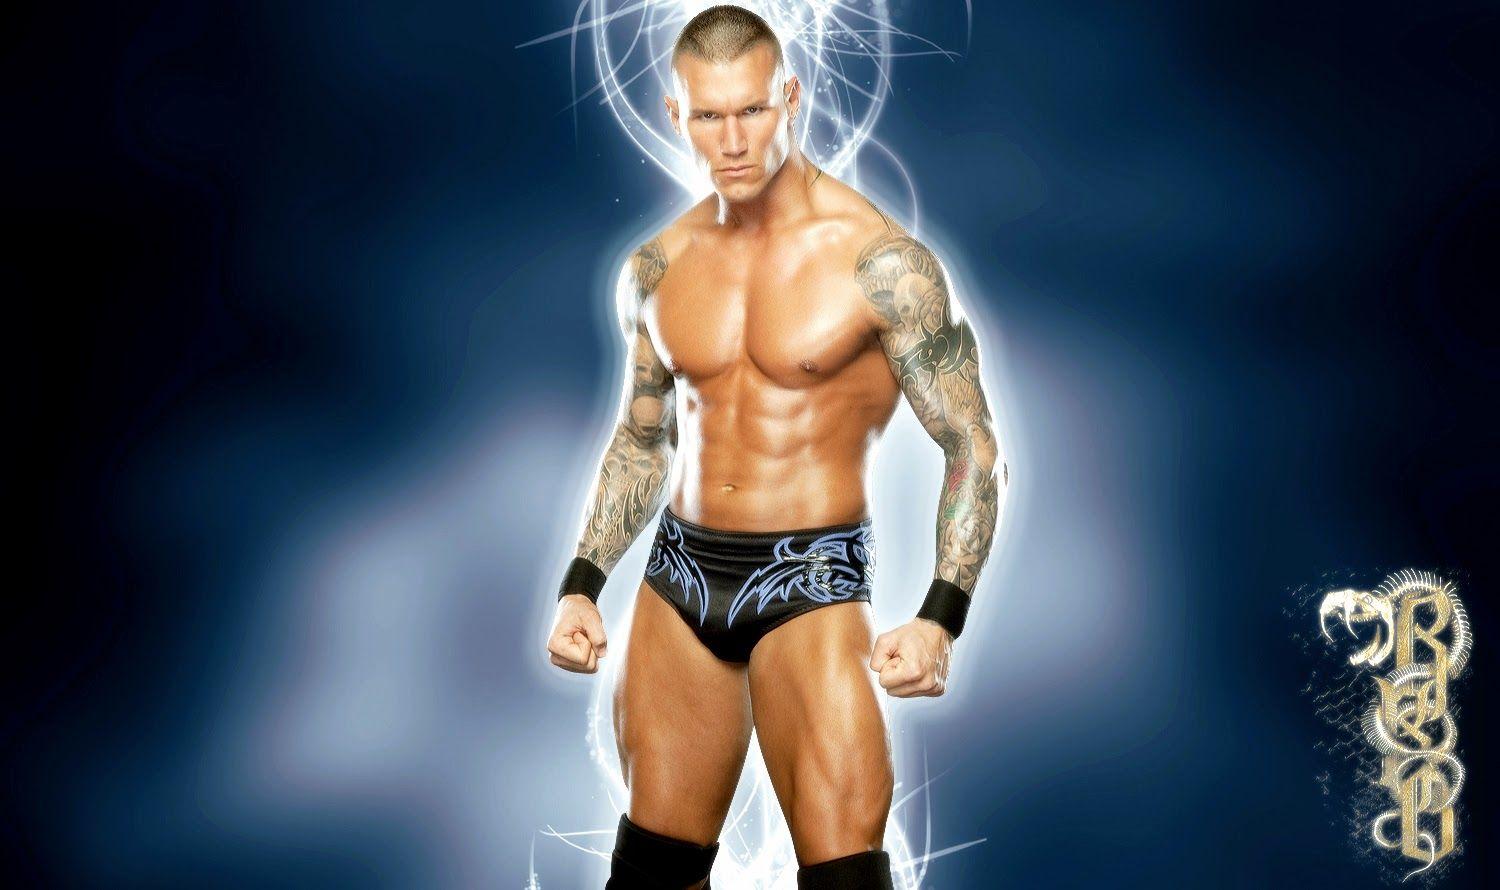 Image For Randy Orton In Suit Wallpapers.